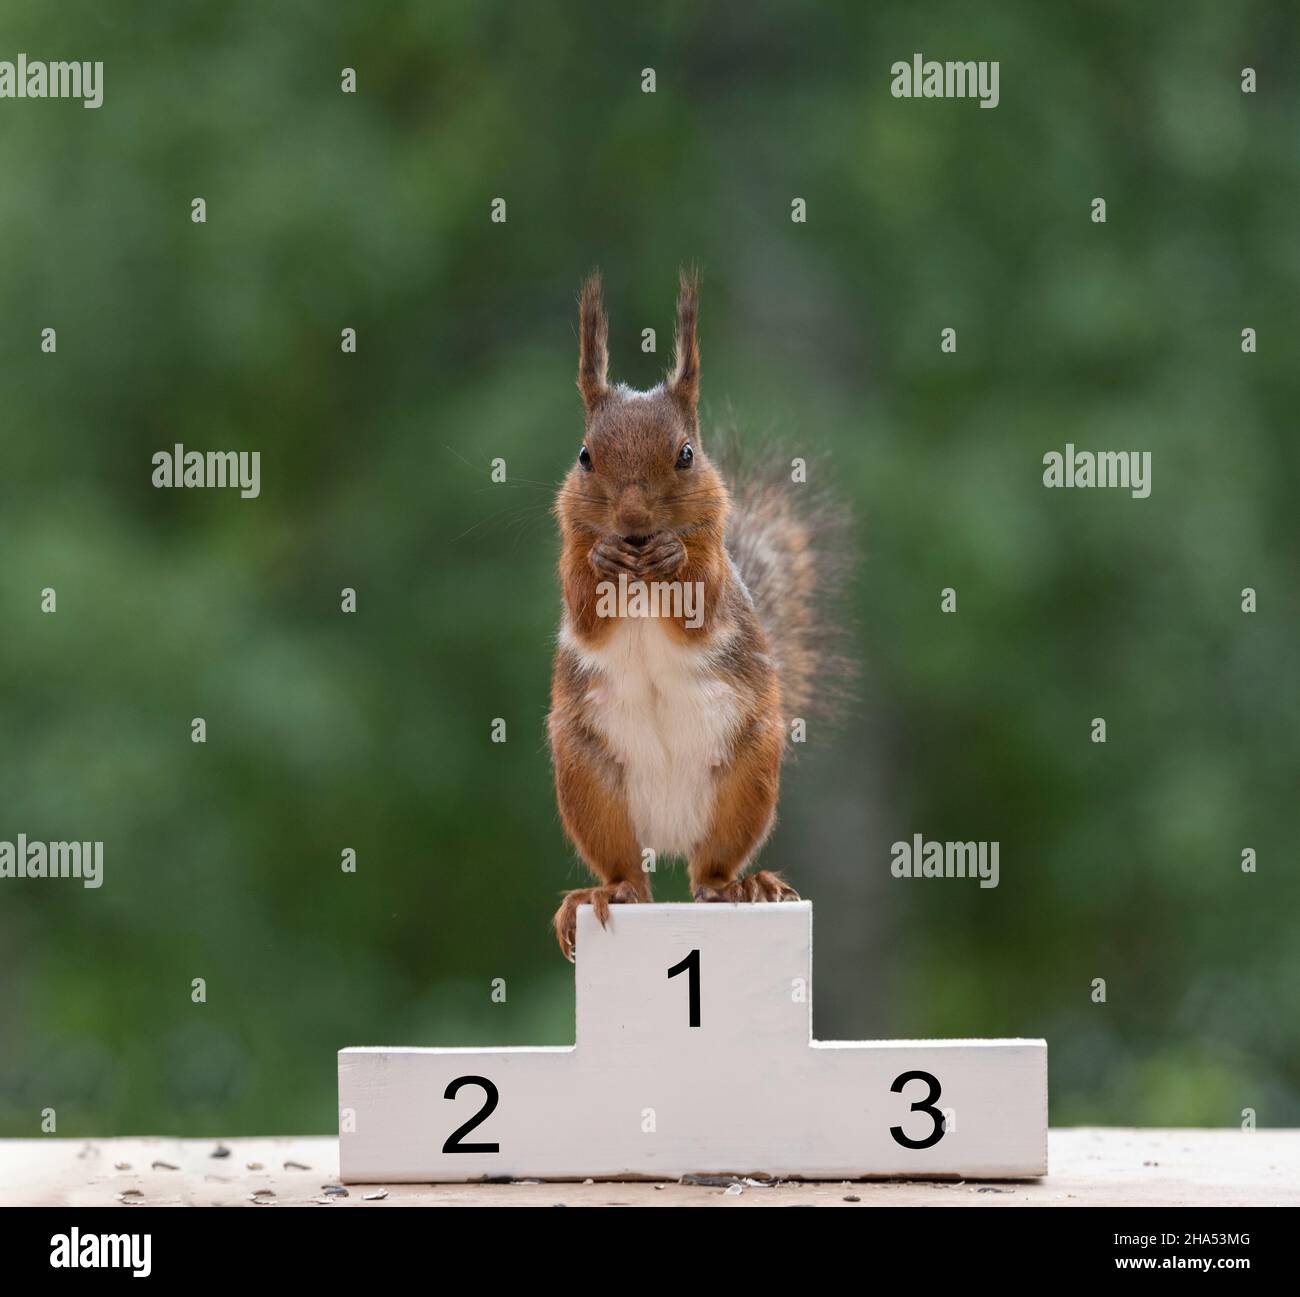 red squirrel is standing on a podium Stock Photo